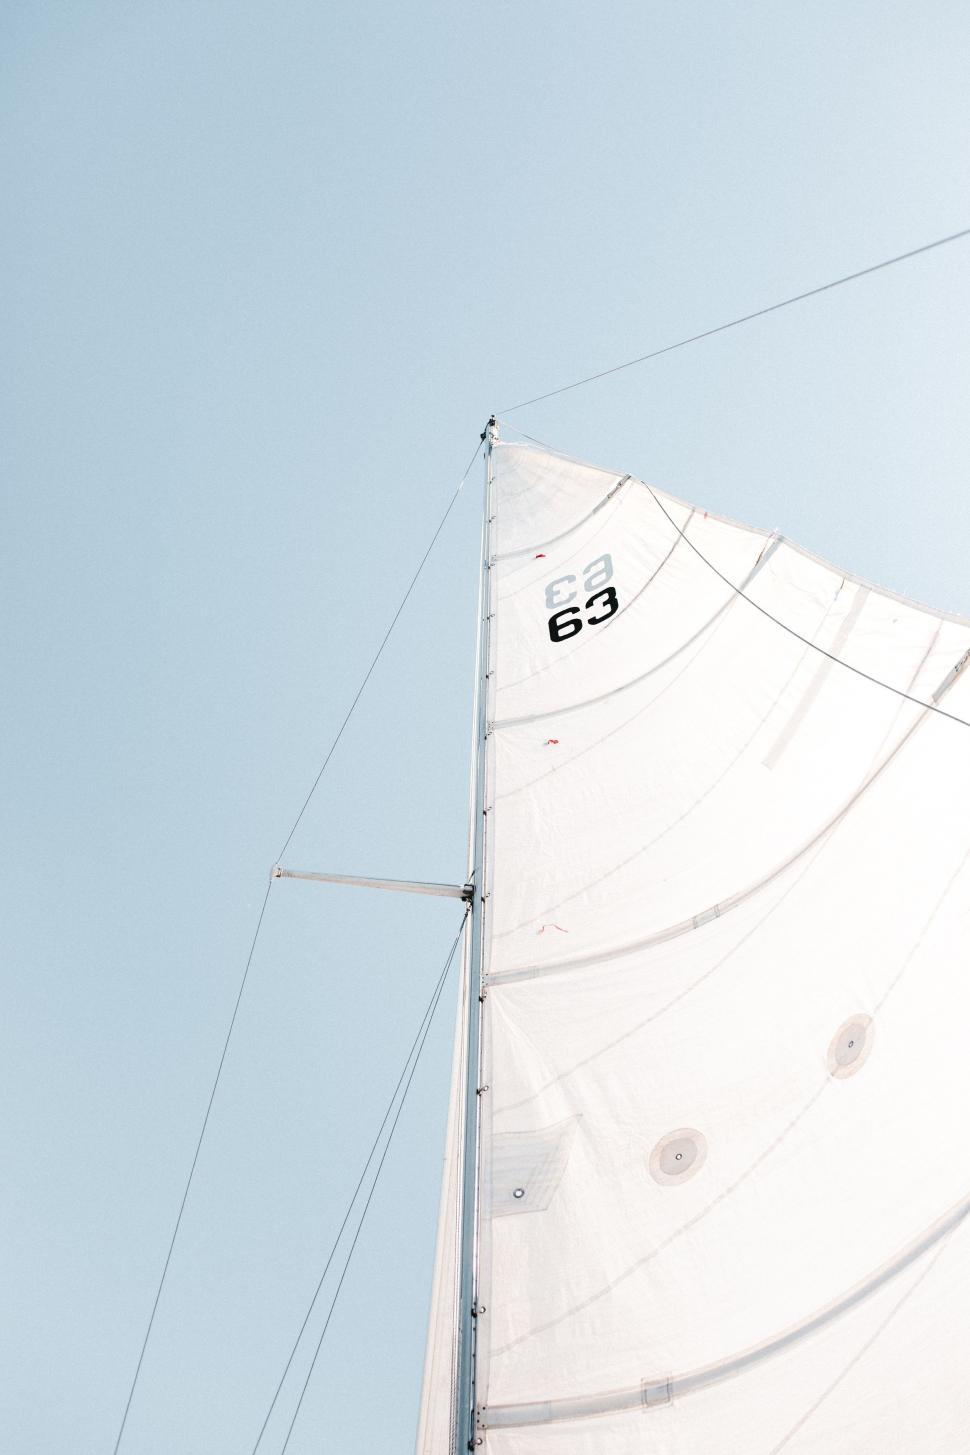 Free Image of White Sail Boat With Number 55 